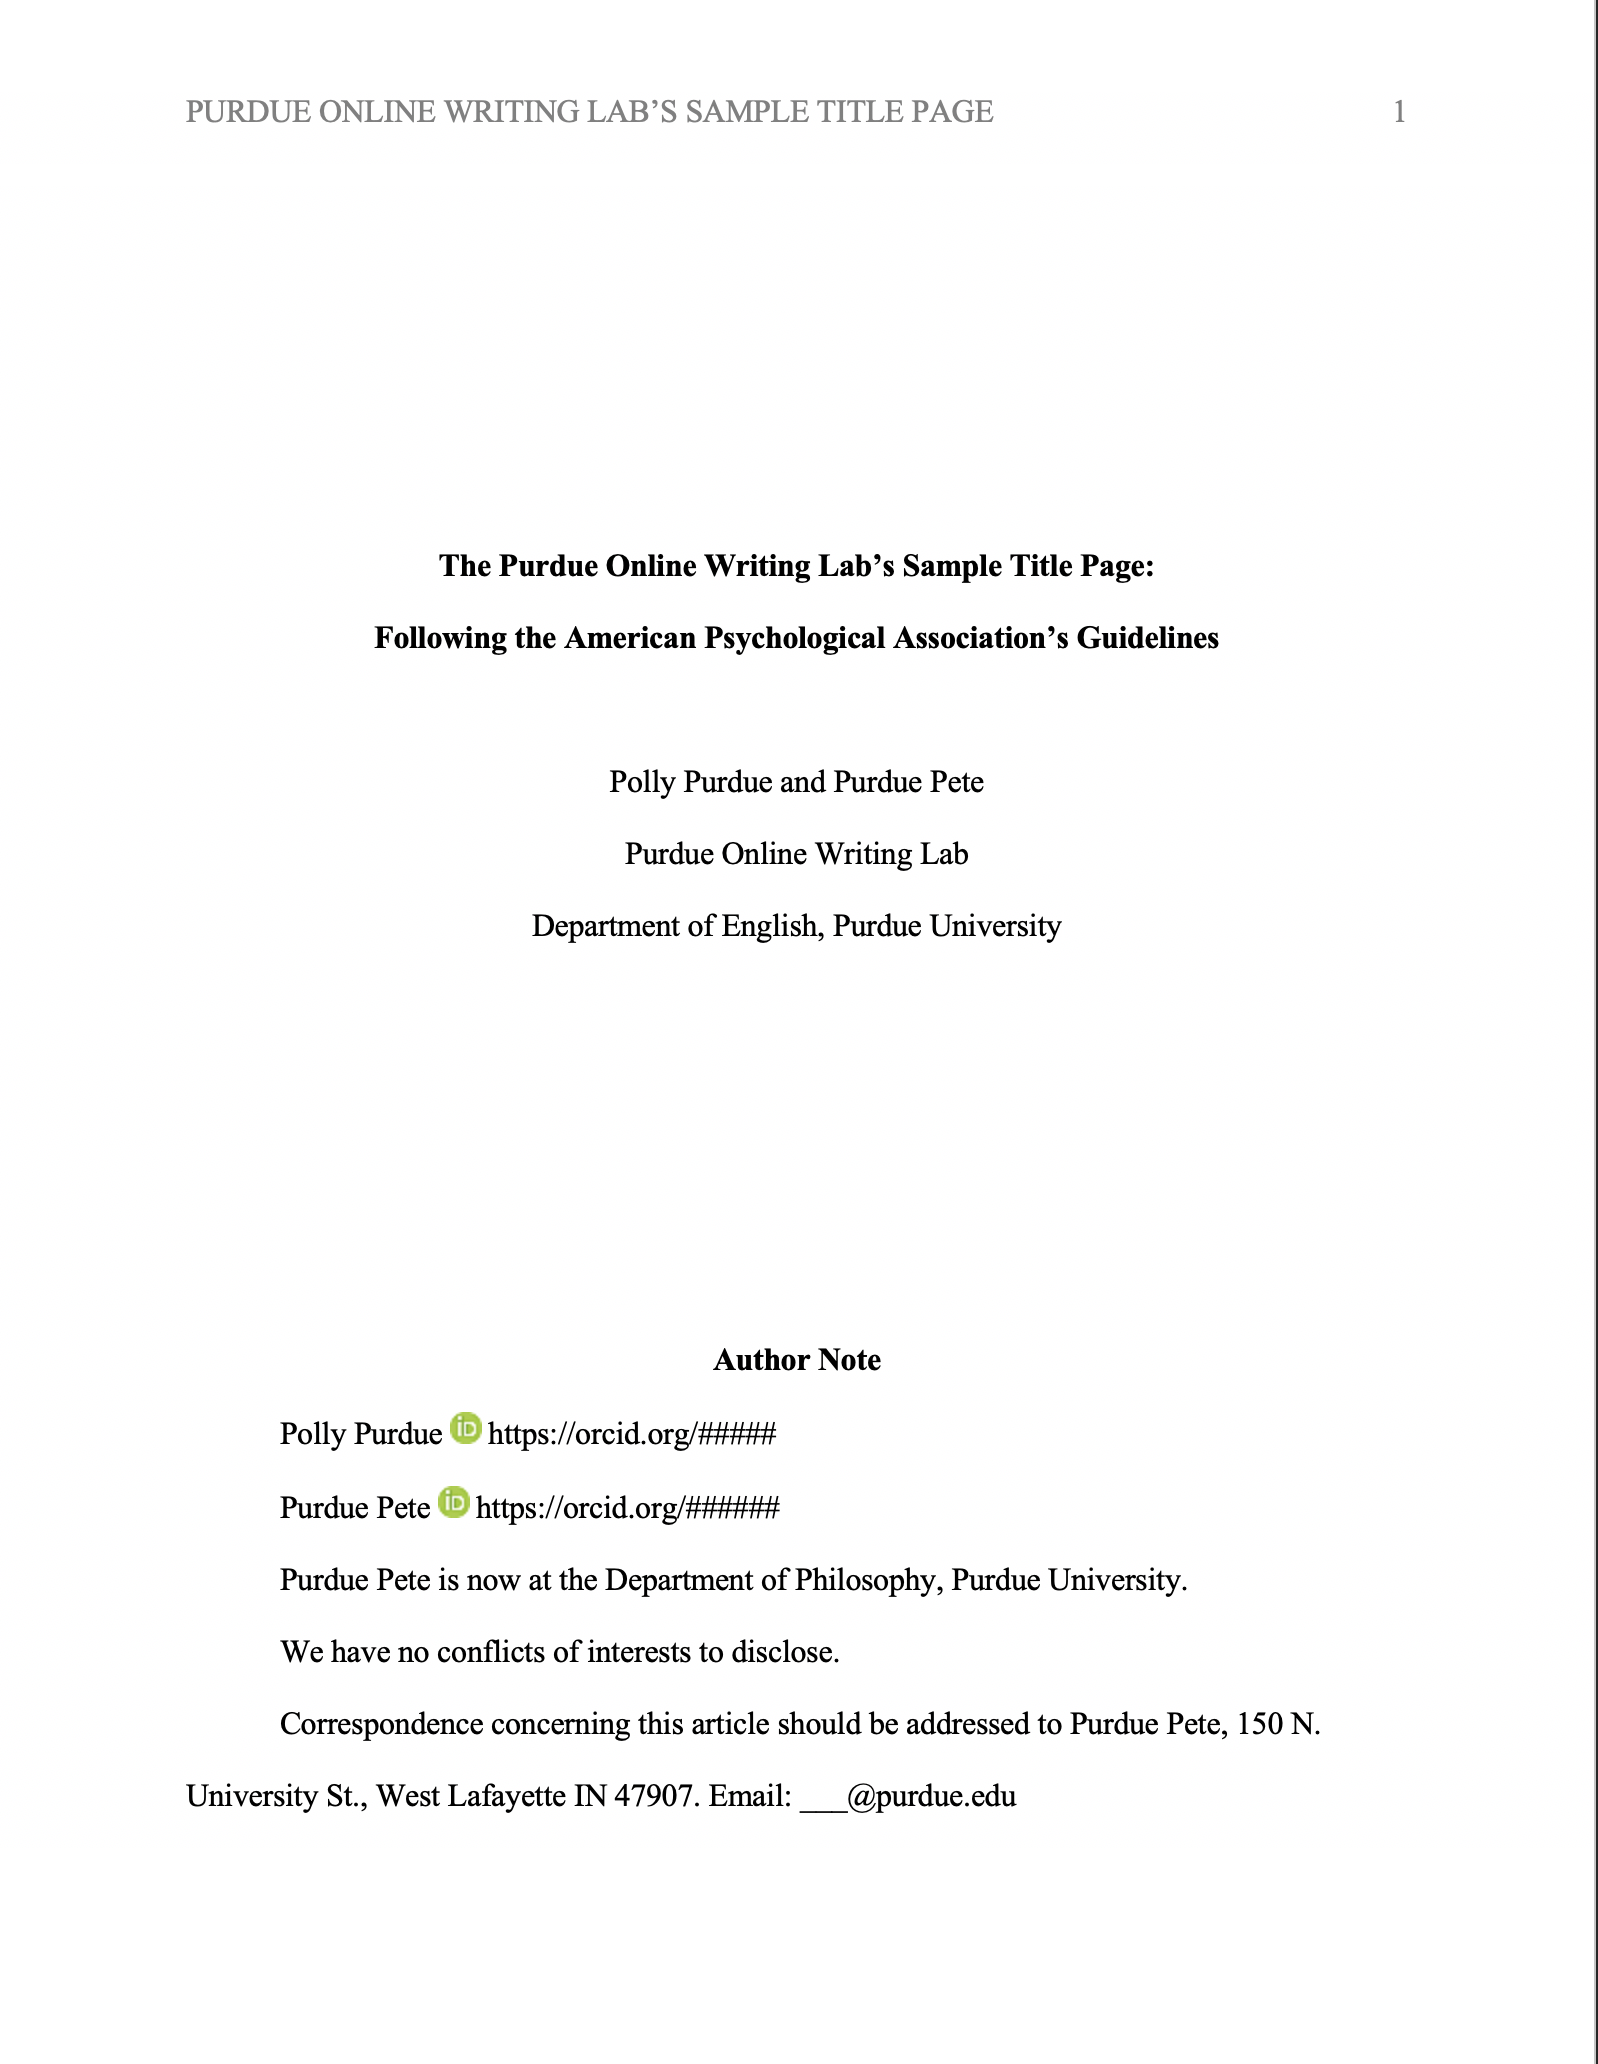 This image shows the title page for a professional APA seventh edition paper.